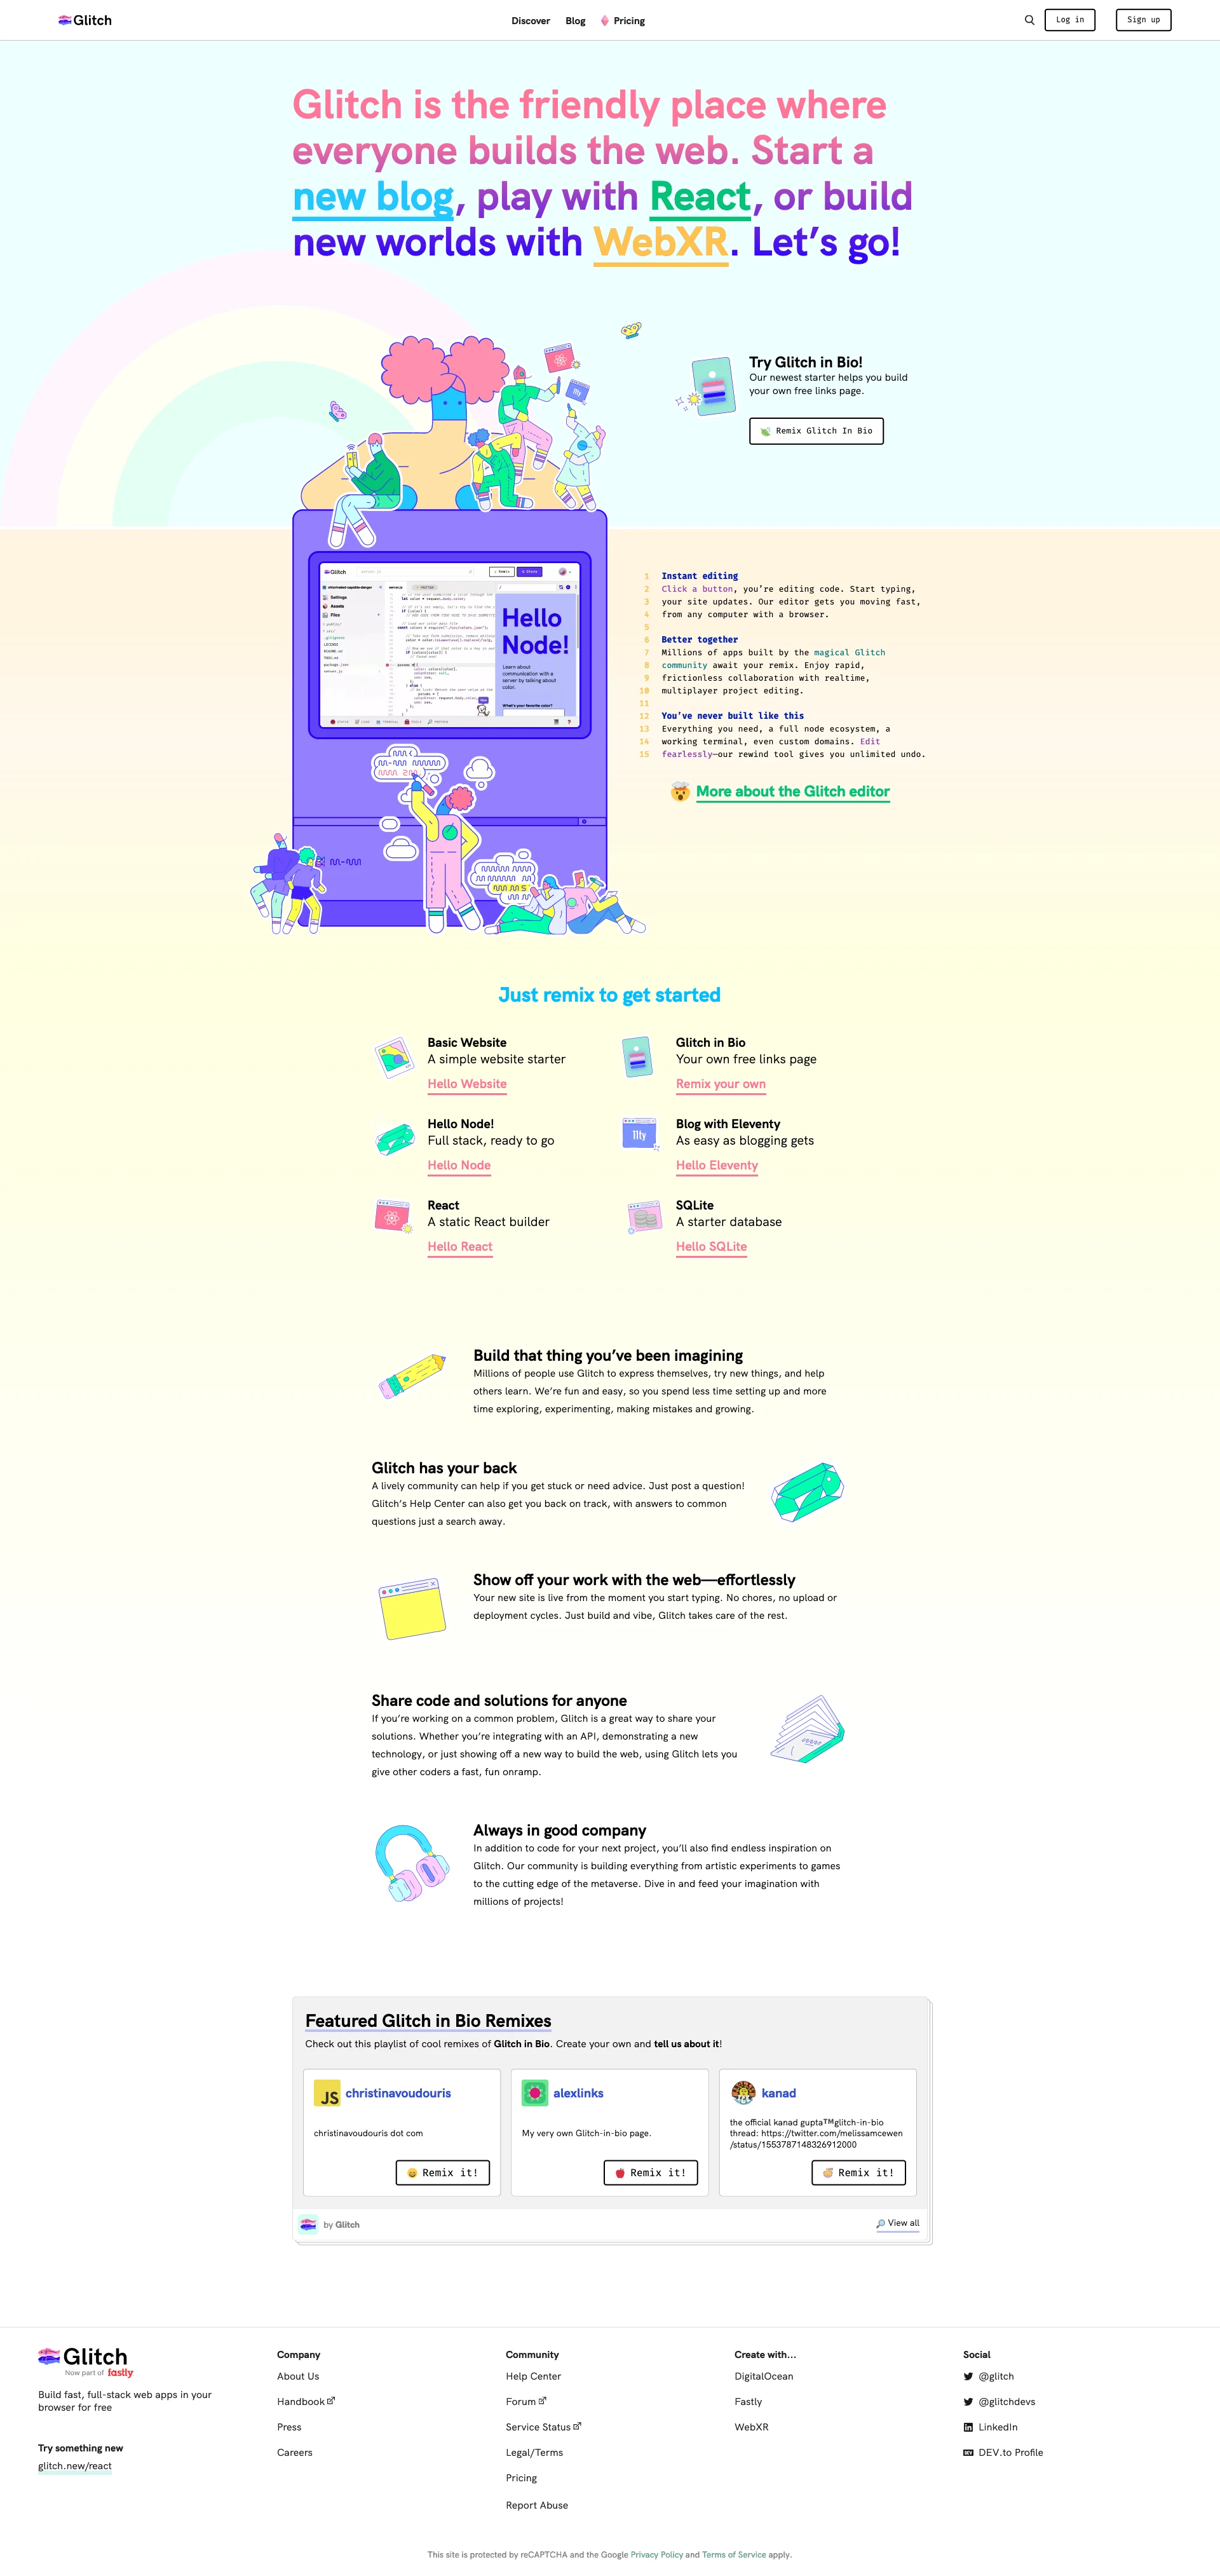 Glitch Landing Page Example: Glitch is the friendly place where everyone builds the web. Start a new blog, play with React, or build new worlds with WebXR. Let’s go!